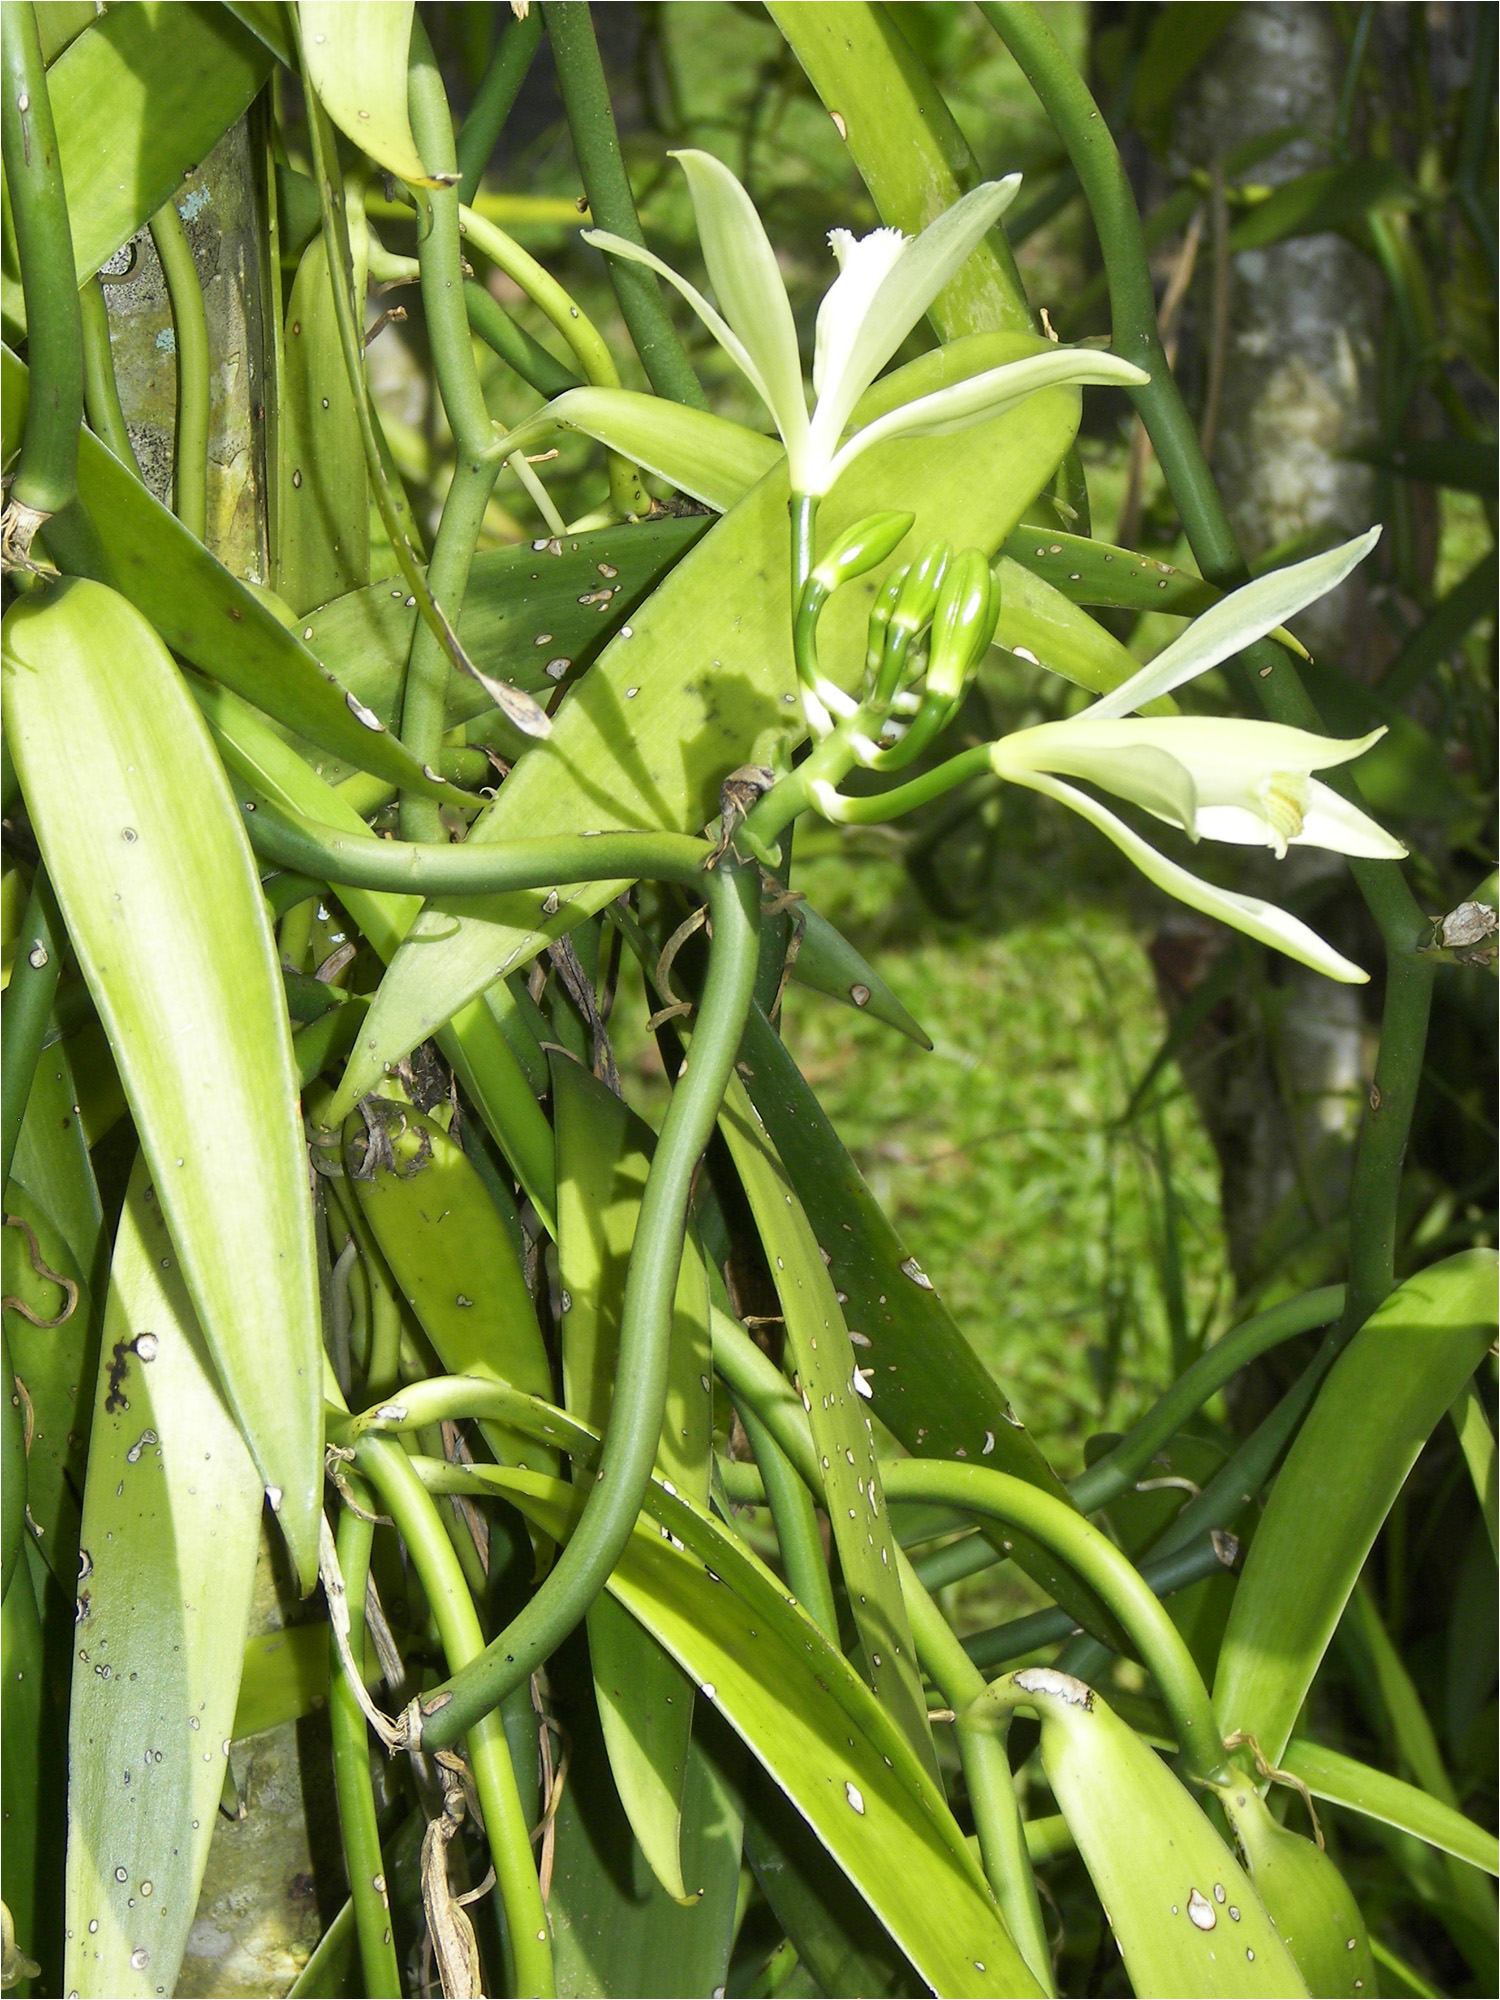 Vanilla vine with flower. The vanilla flowers are pollinated by hand.